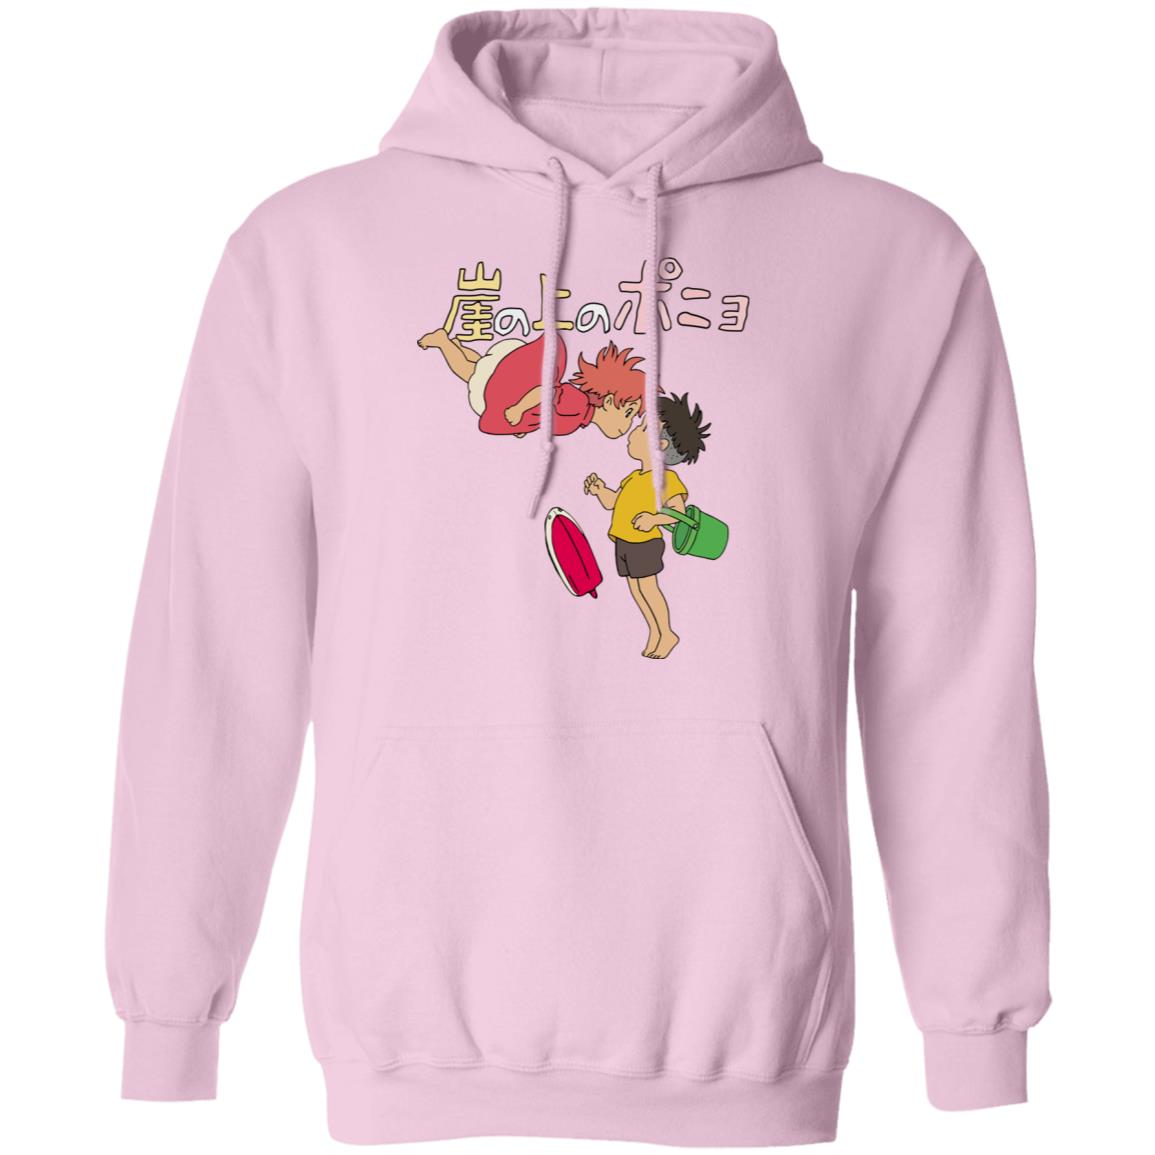 Ponyo on the Cliff by the Sea Hoodie Unisex